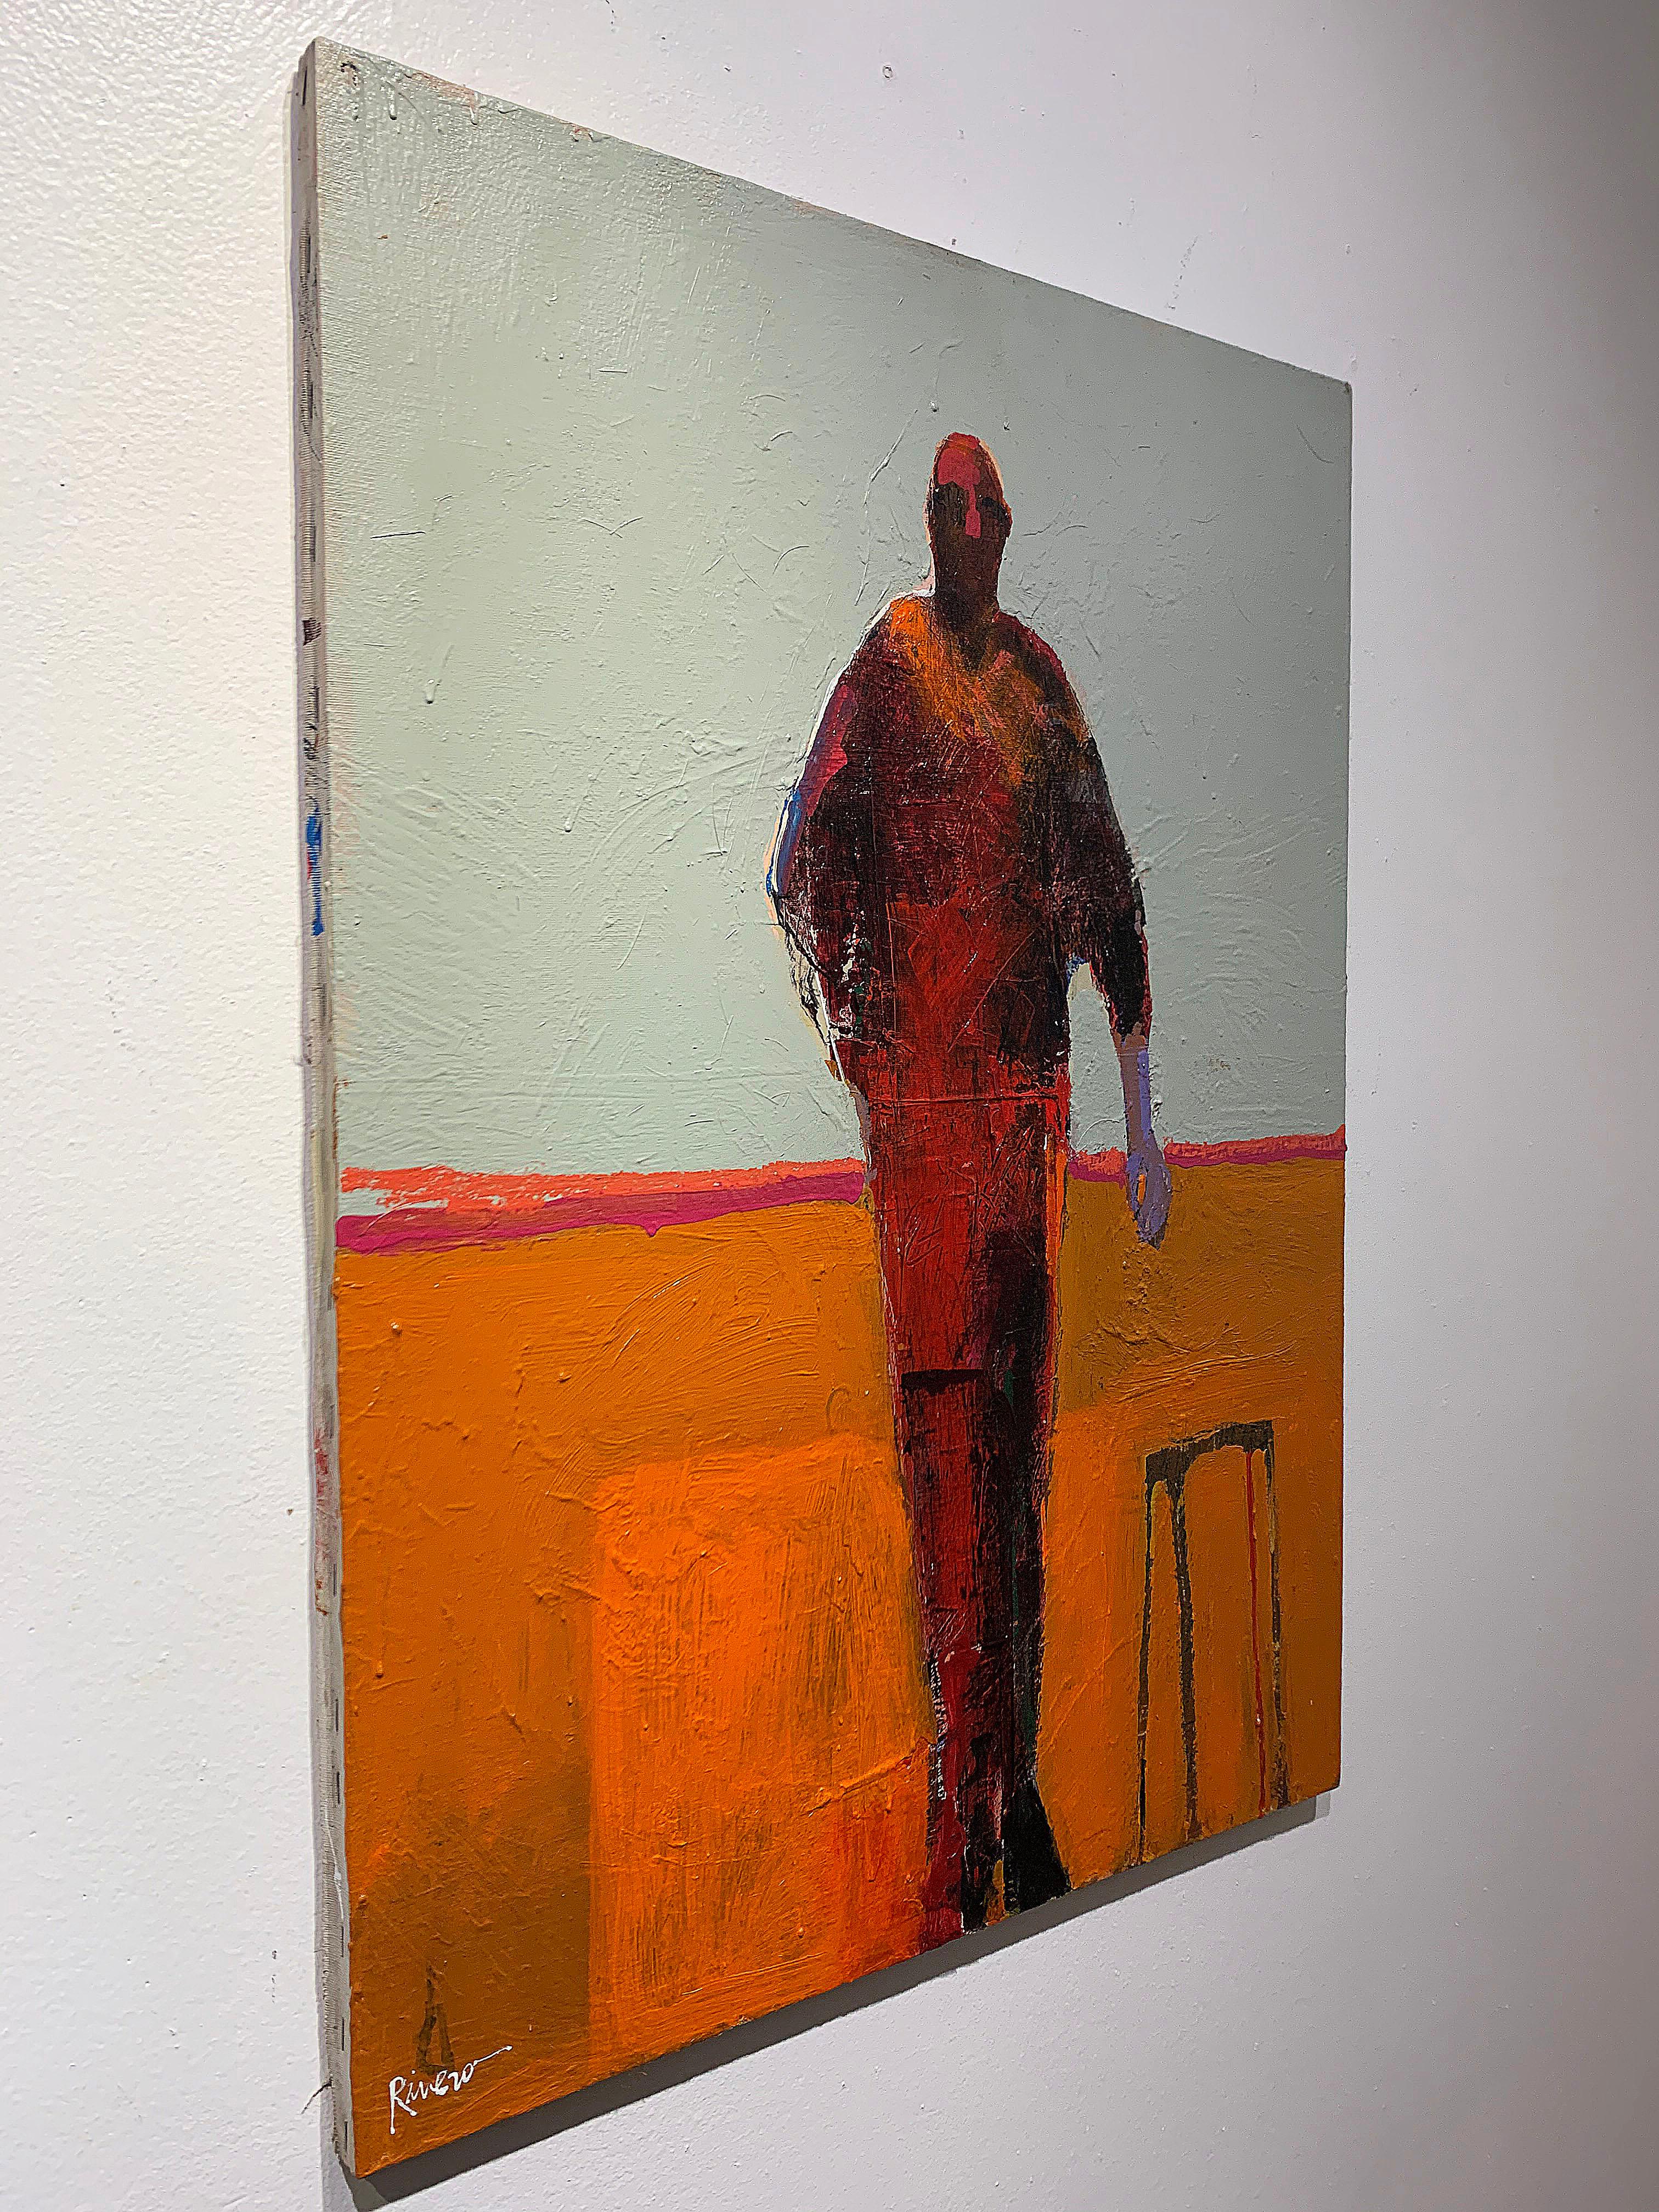 Personaje with Stool, standing figurative painting, orange and taupe - Contemporary Painting by Mike Rivero 